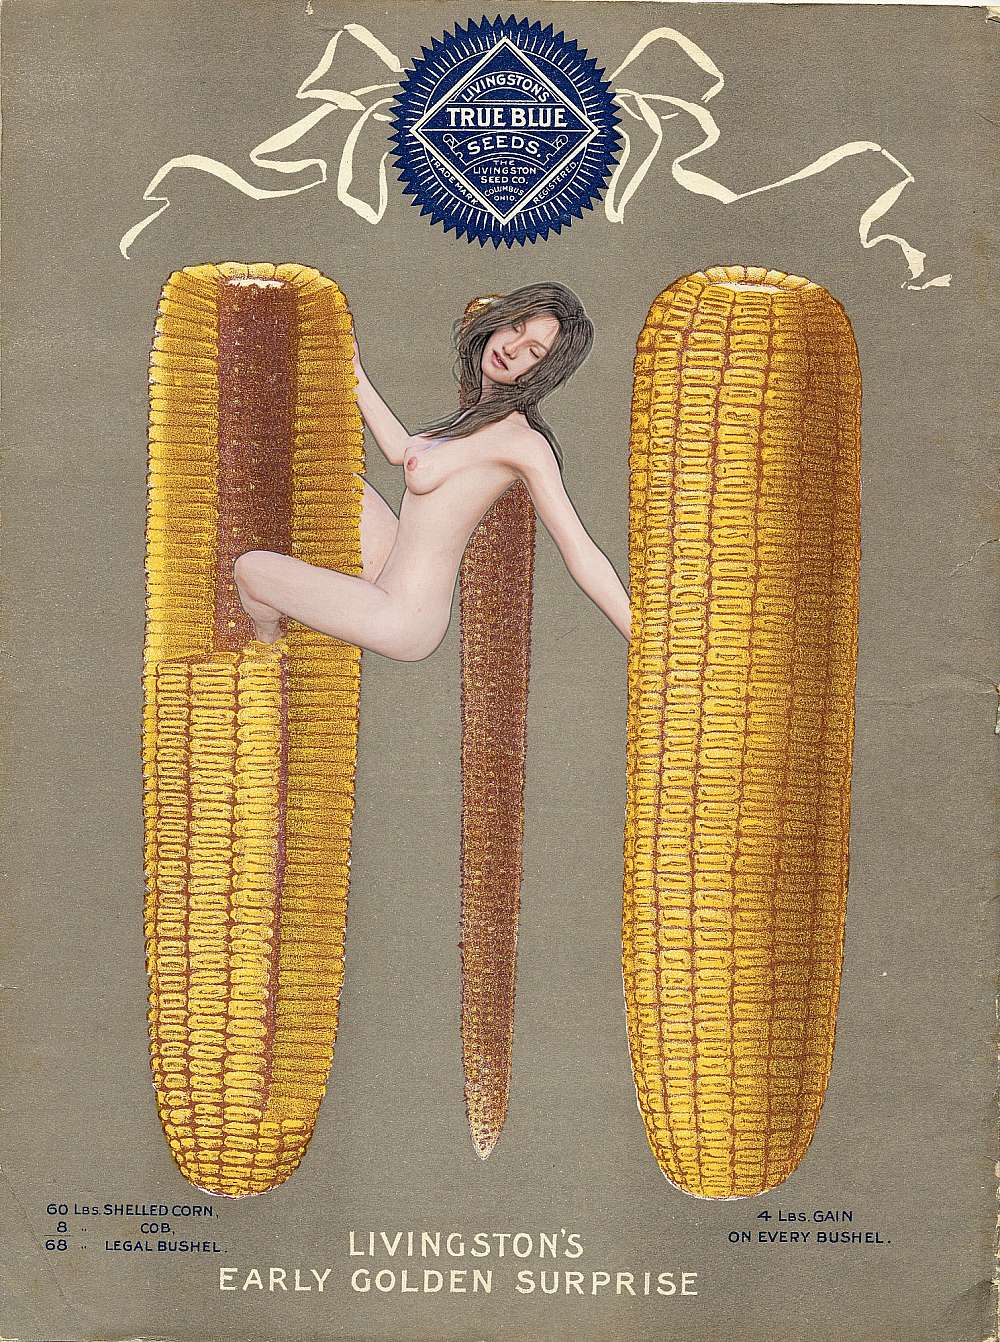 Naked woman on ears of corn cover